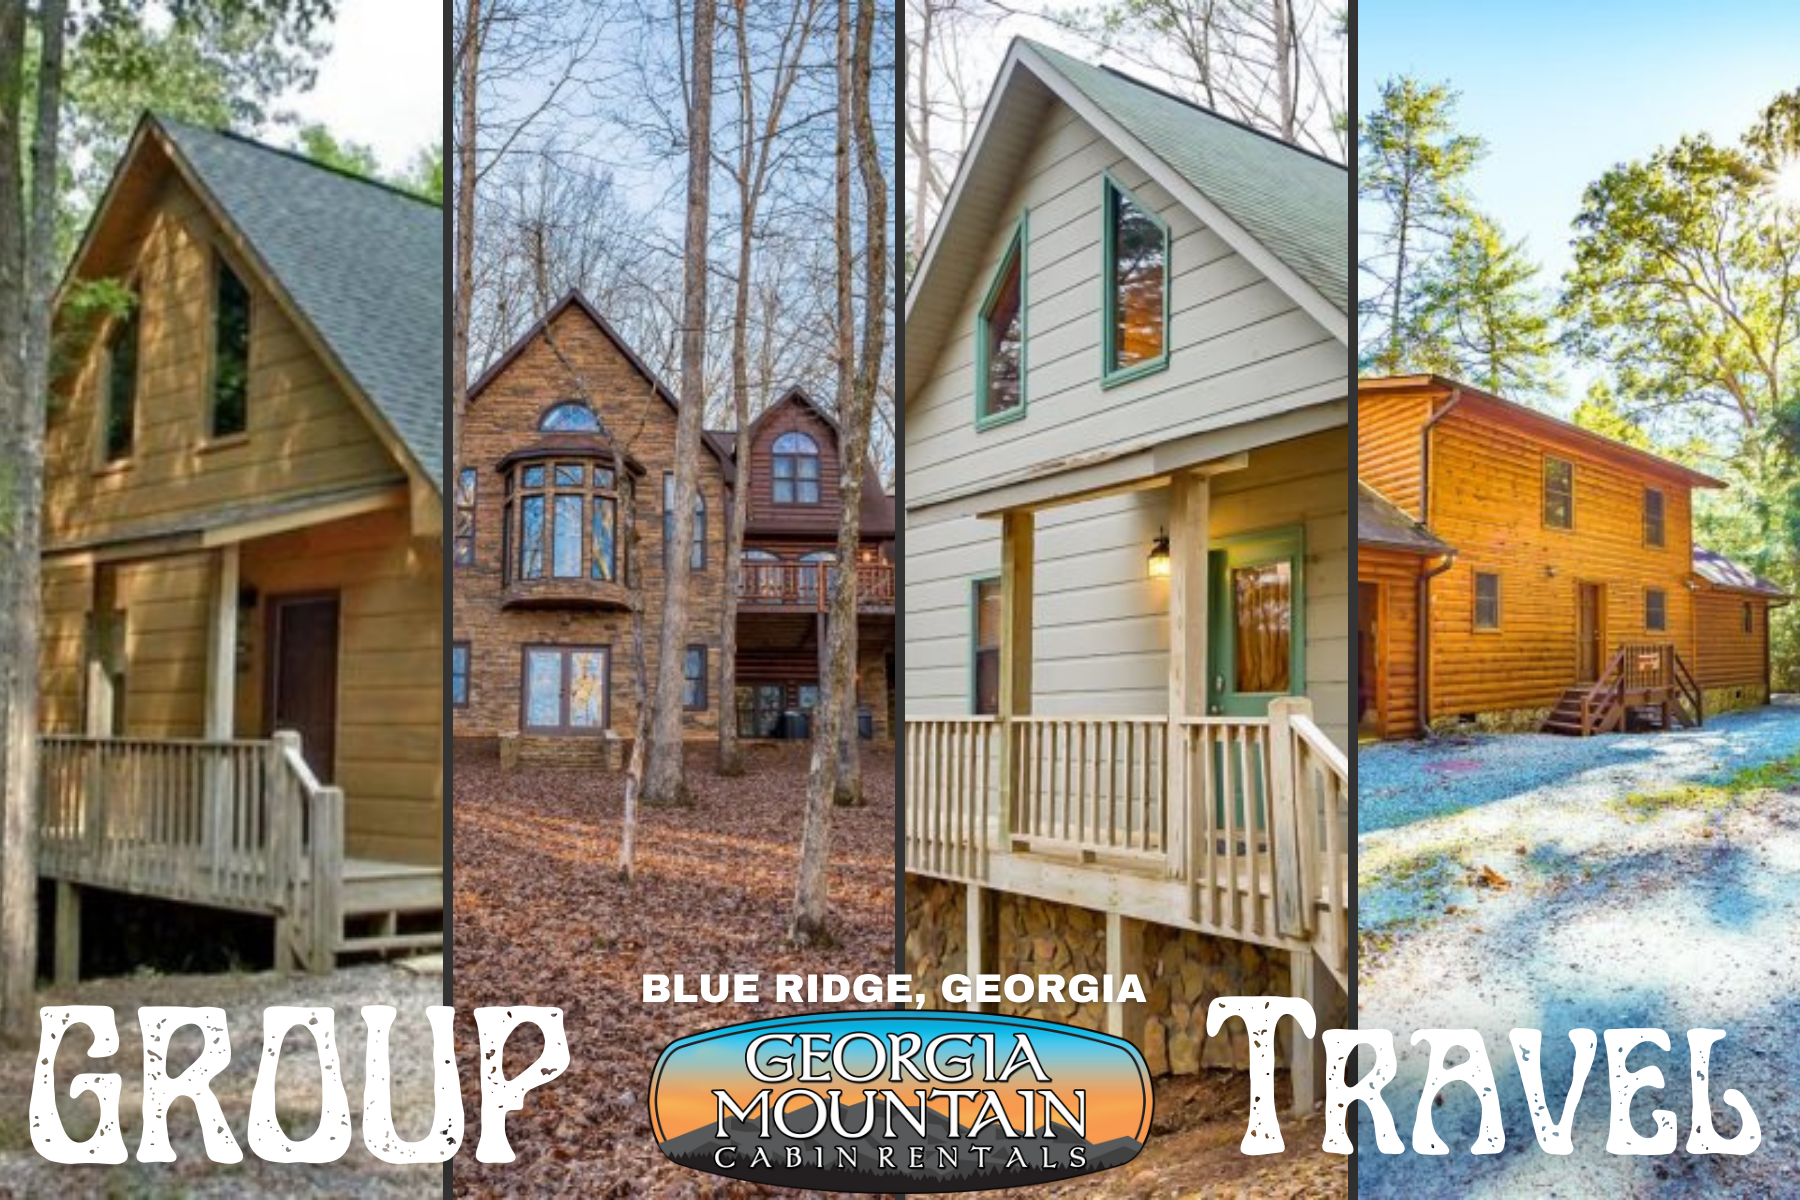 Group of 4 properties by Georgia Mountain cabin Rental - Blue Ridge Group Accommodations